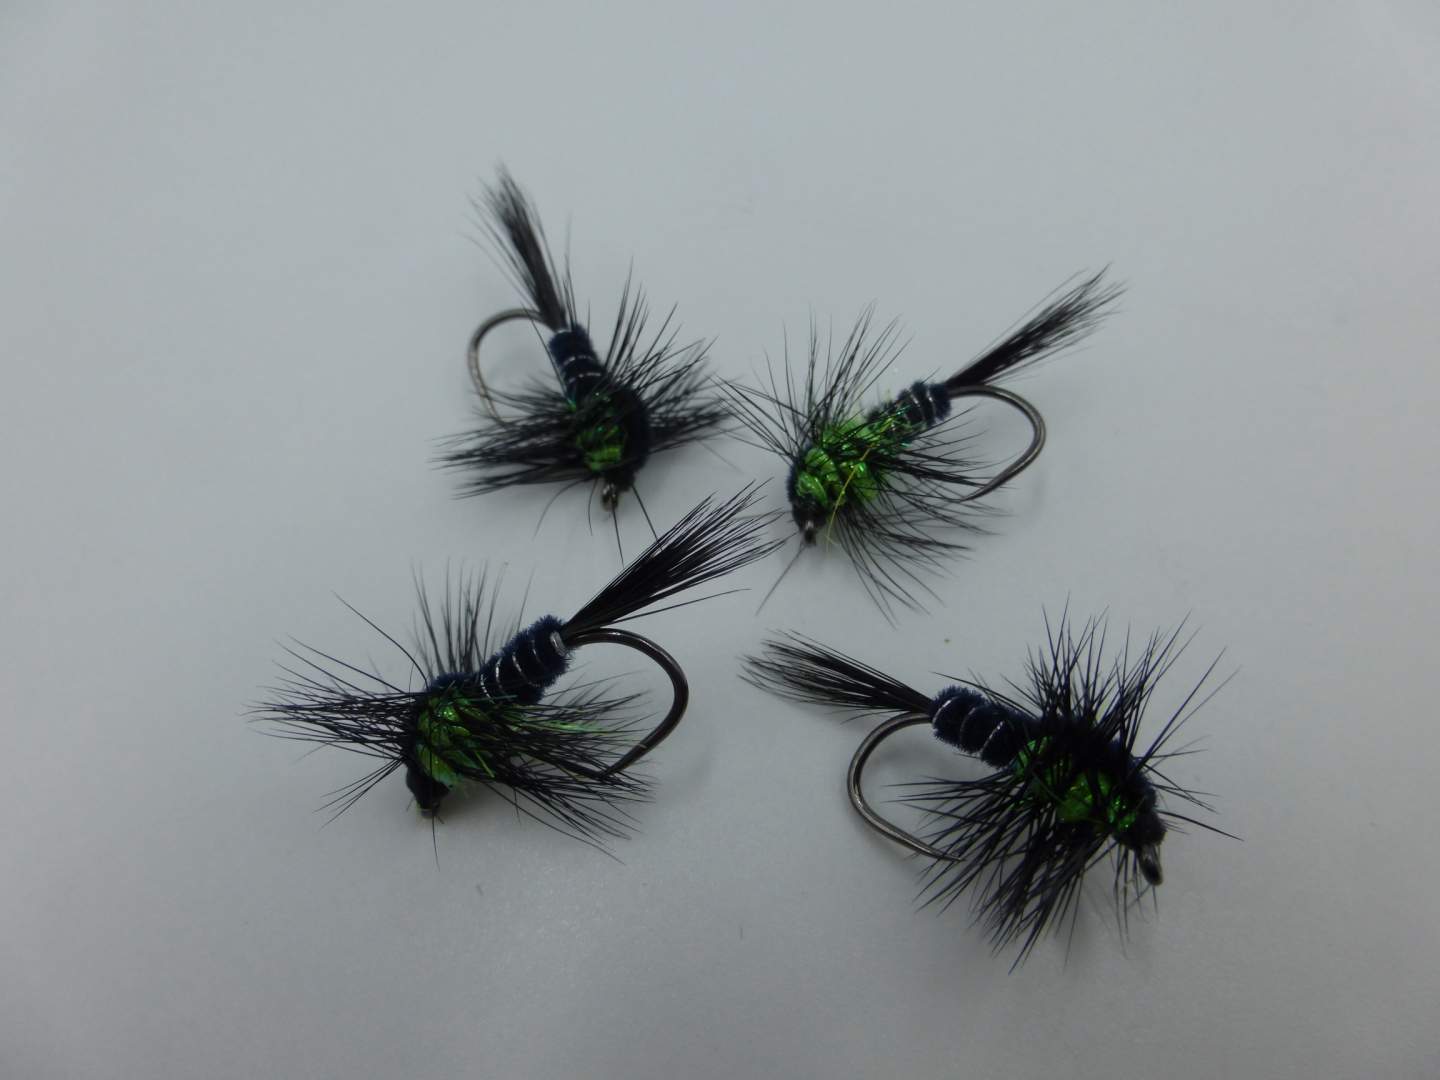 Size 14 Montana Barbless